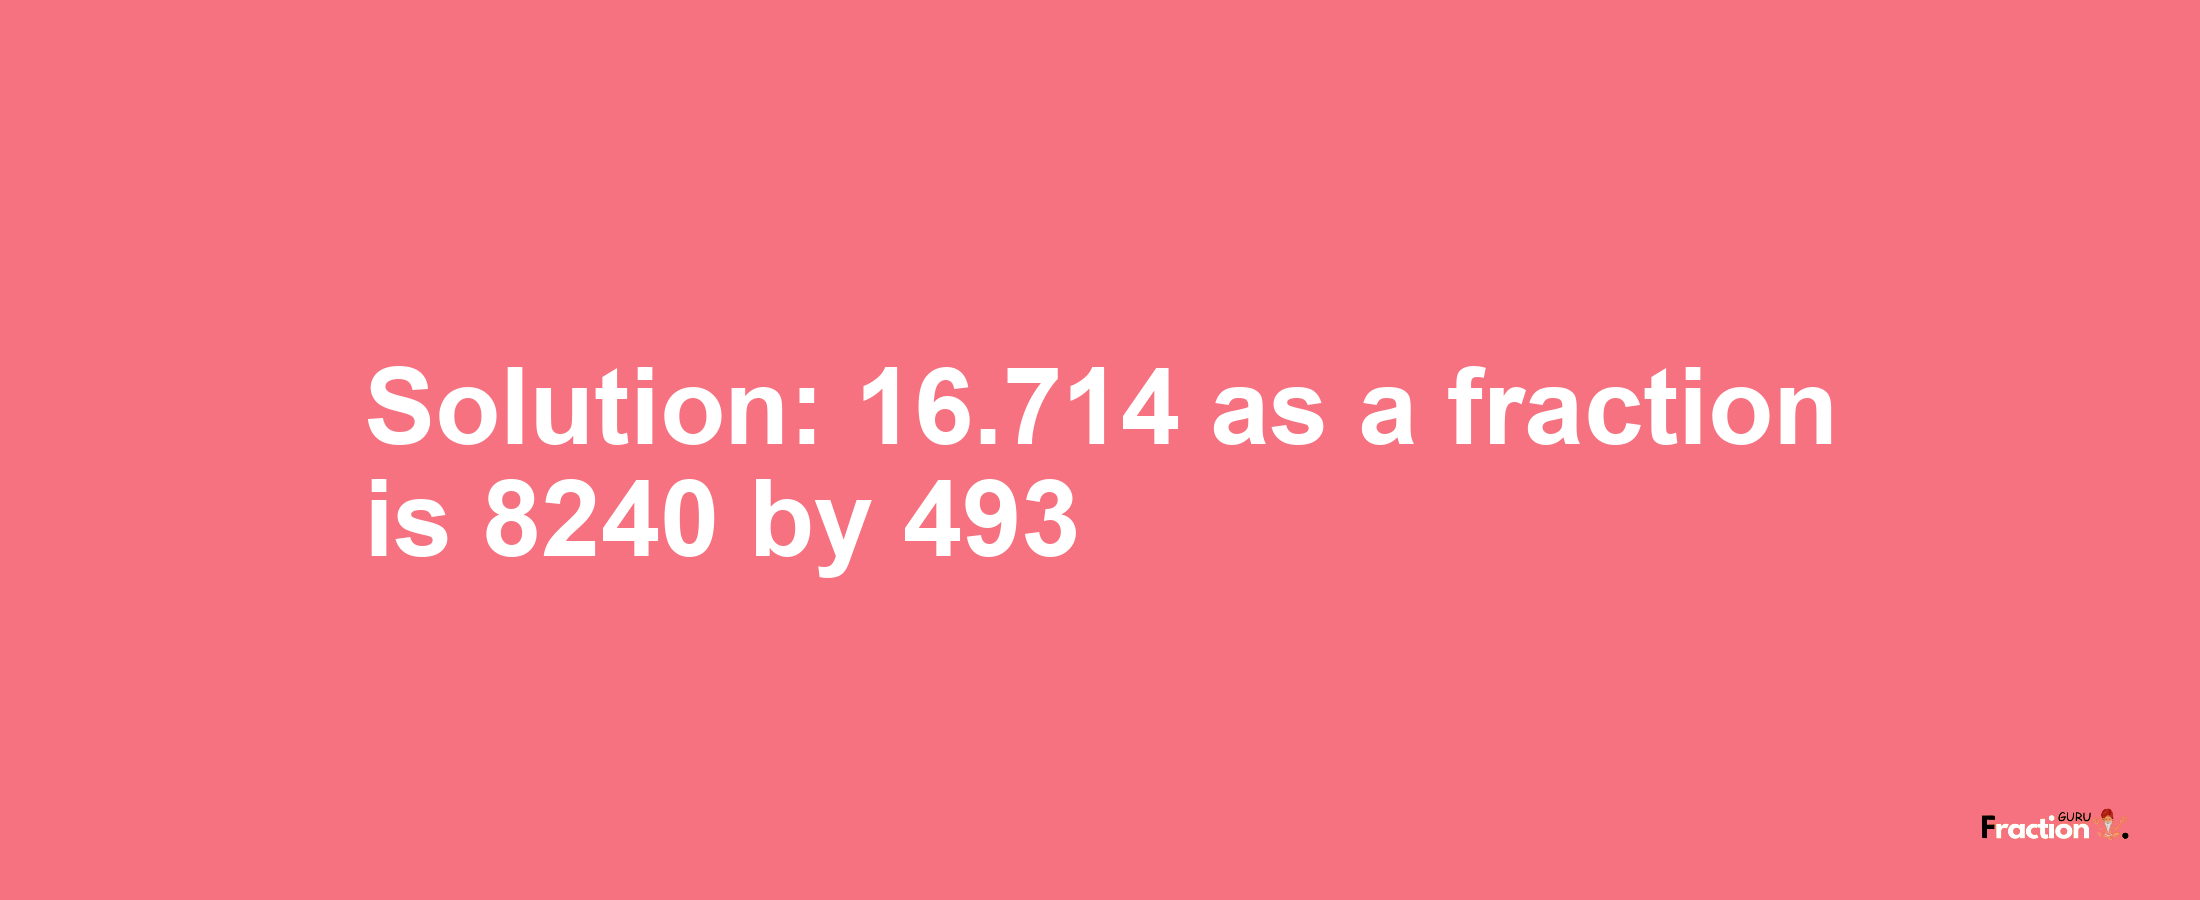 Solution:16.714 as a fraction is 8240/493